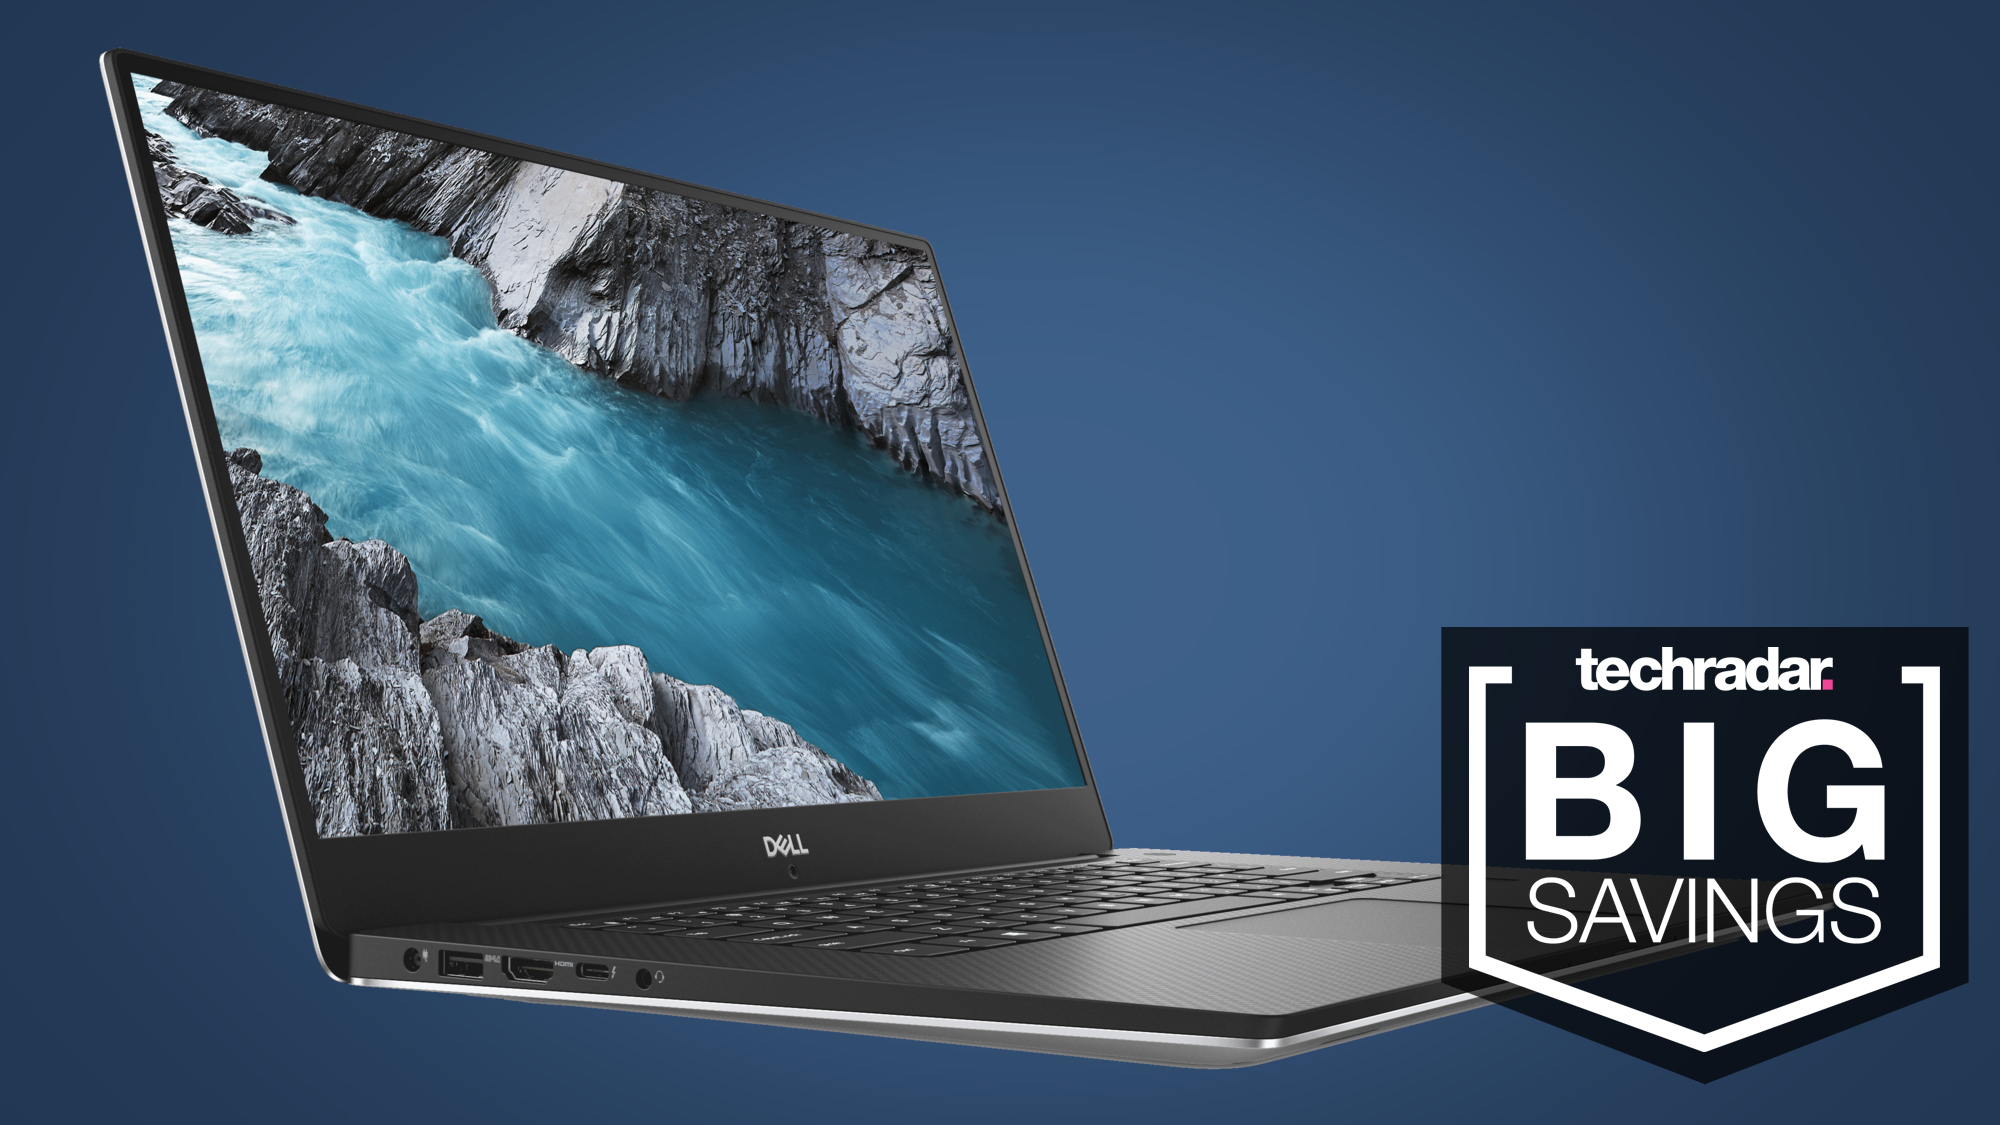 Black Friday Laptop Deals Save 320 On One Of The Best Laptops In The World Techradar